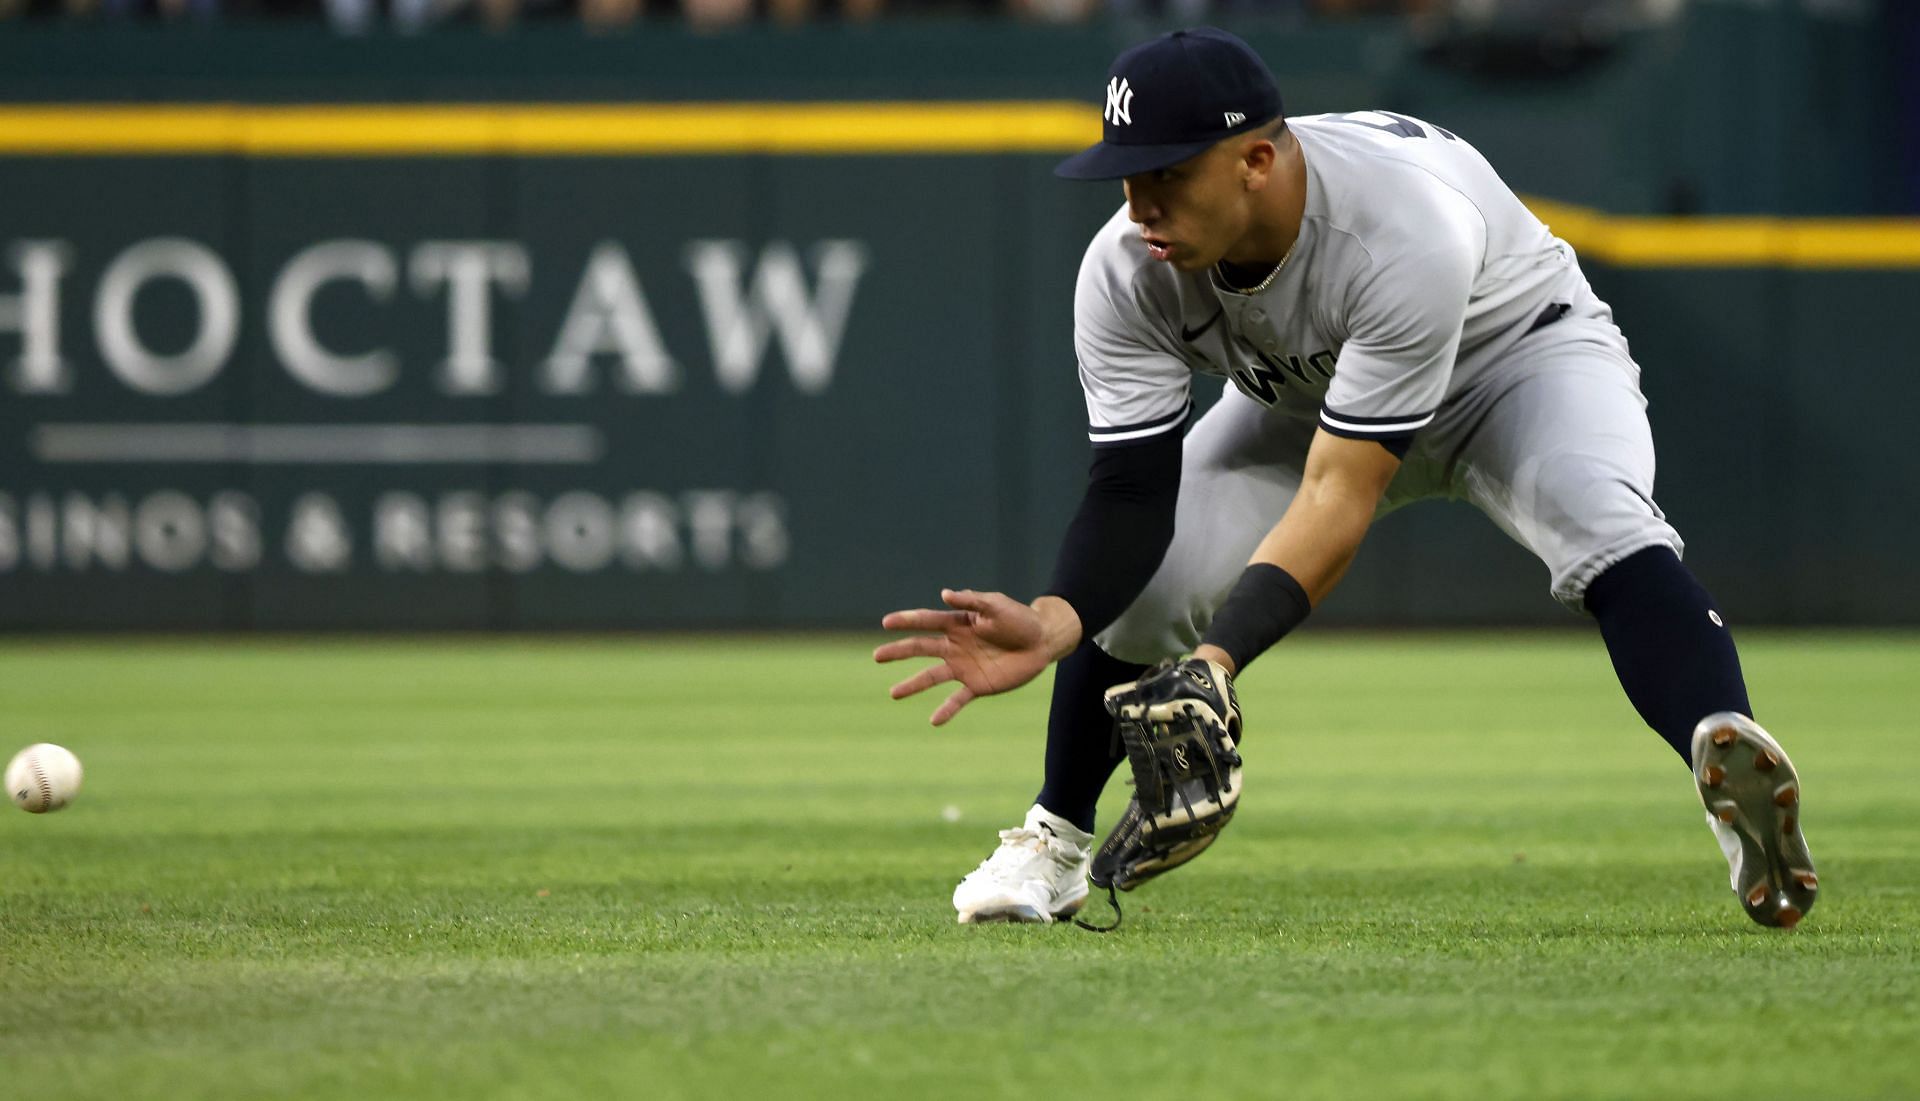 Anthony Volpe or Oswald Peraza? Predicting who will win the Yankees'  shortstop battle - The Athletic